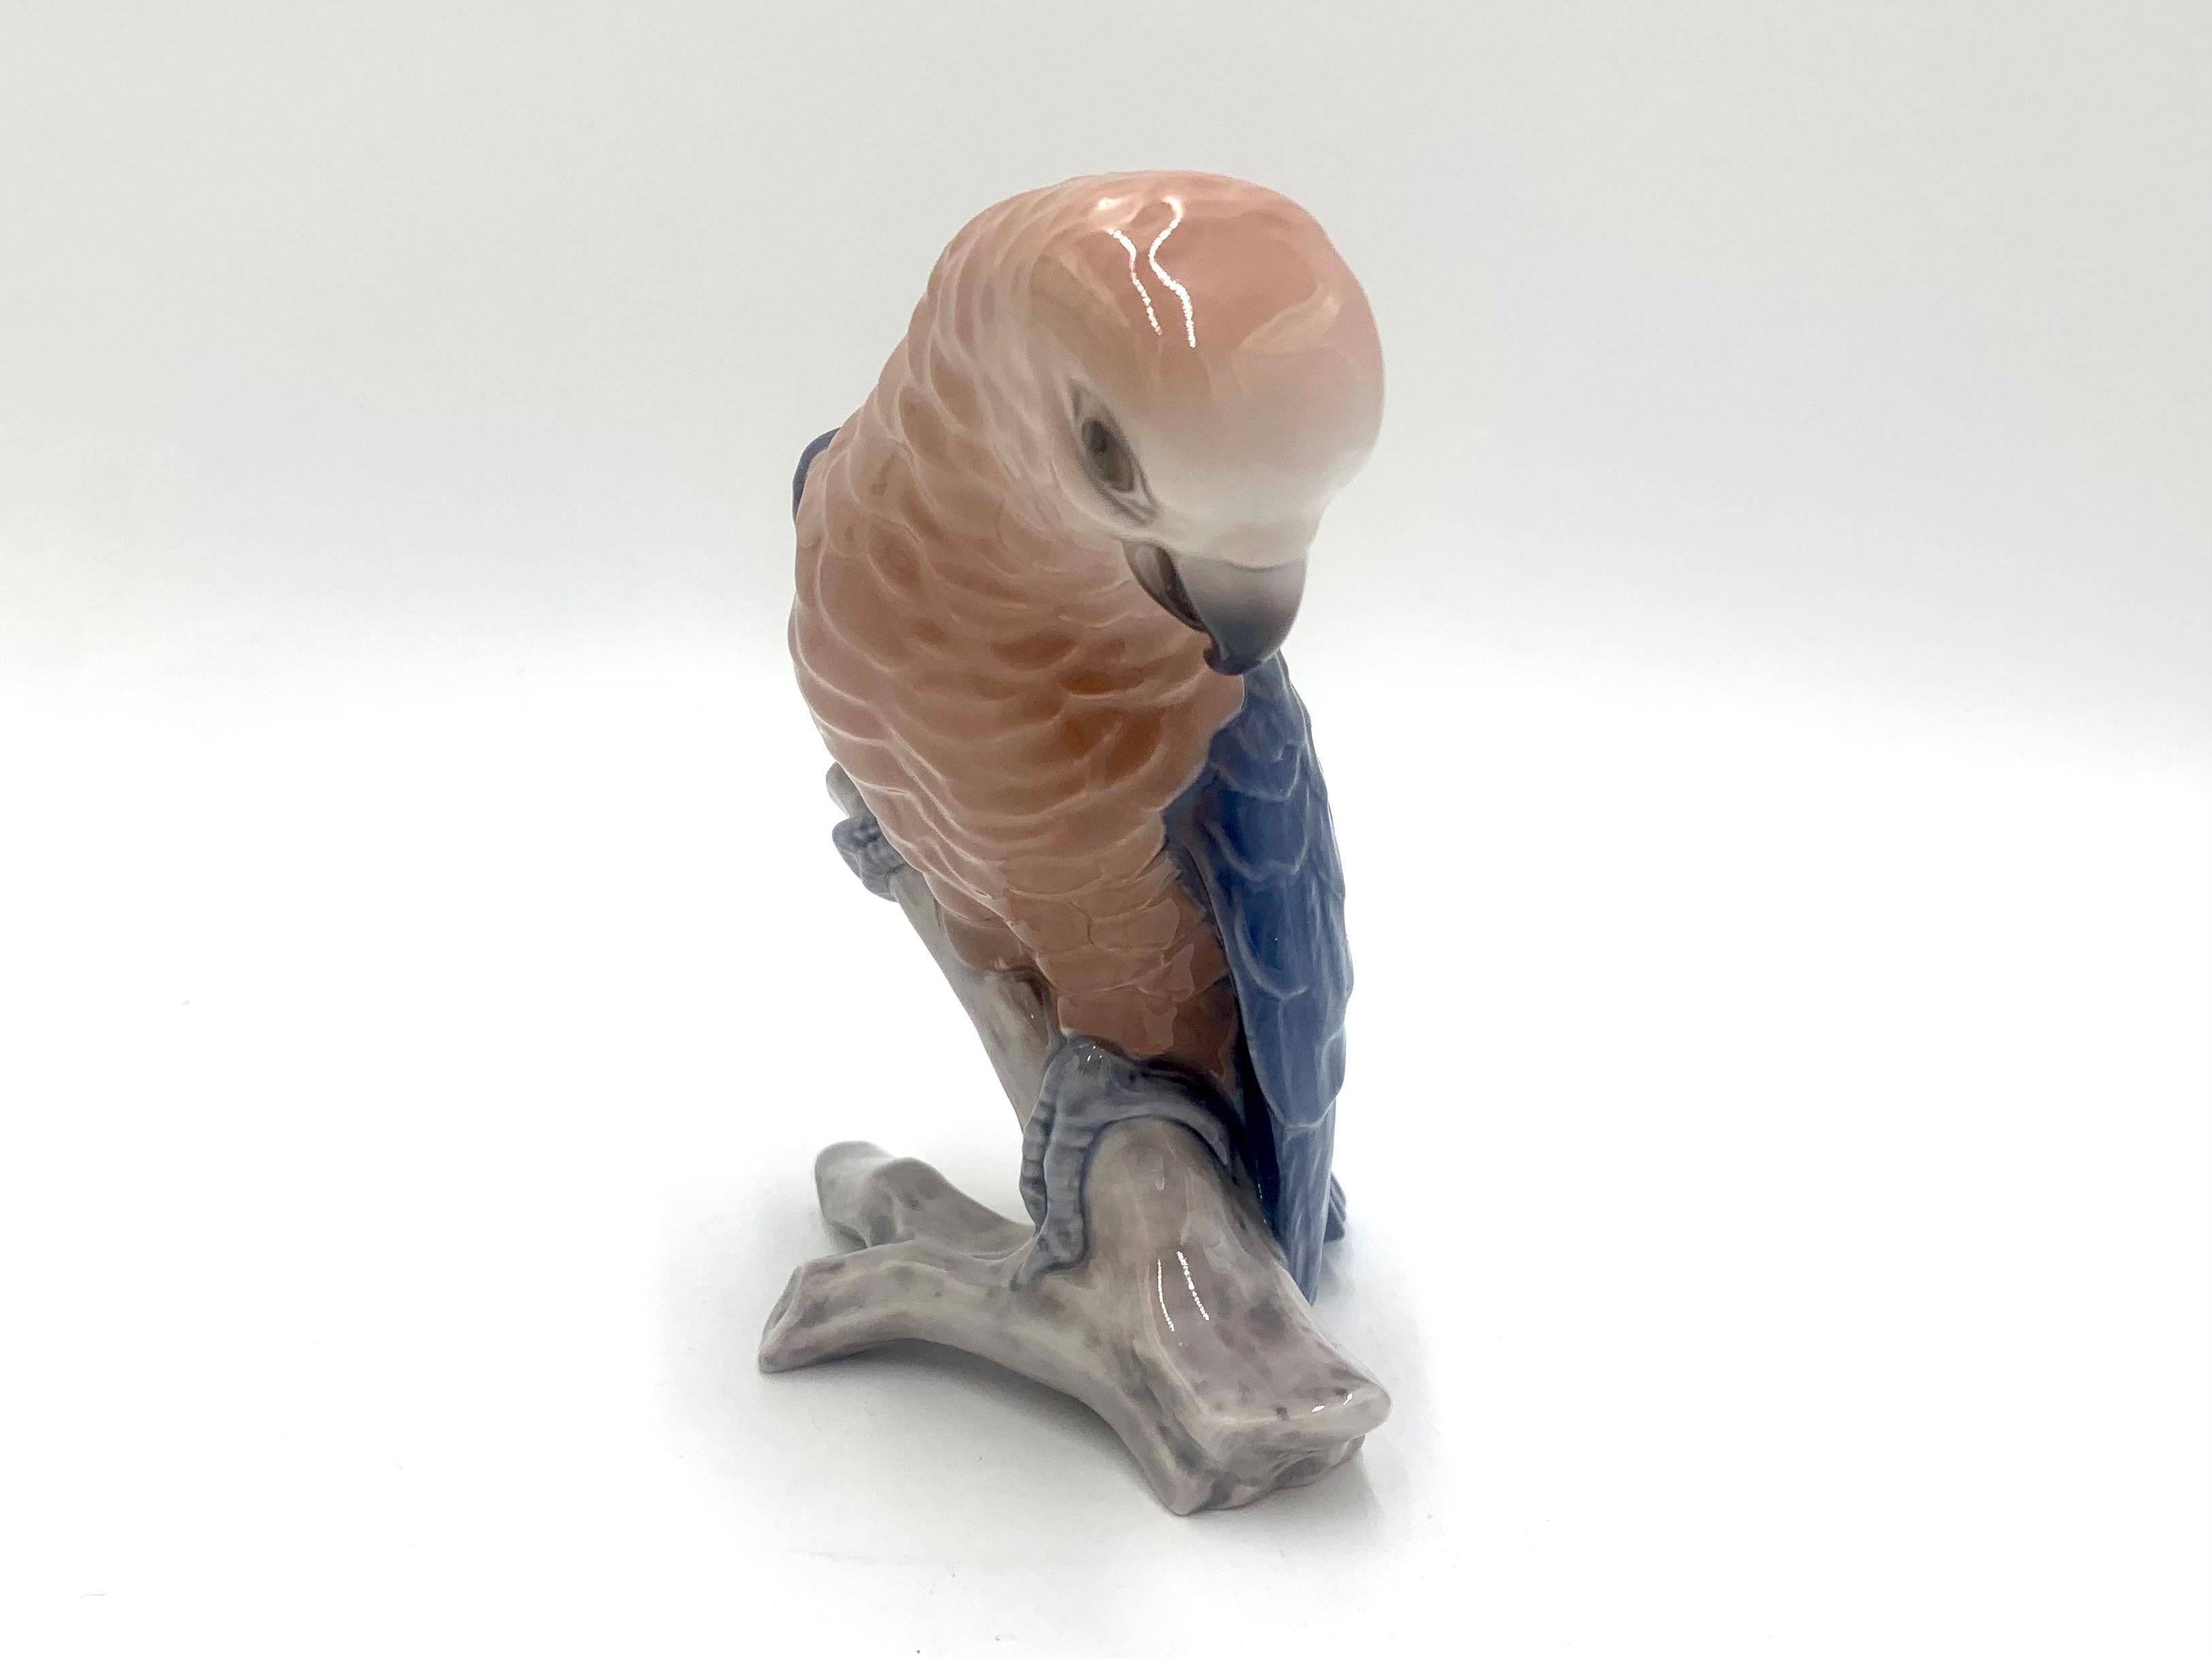 Porcelain figurine of a parrot

Made in Denmark by Bing & Grondahl

Produced in 1970-1983

Model number # 2019

Very good condition, no damage.

Measures: height 14,5 width 12cm depth 10cm.